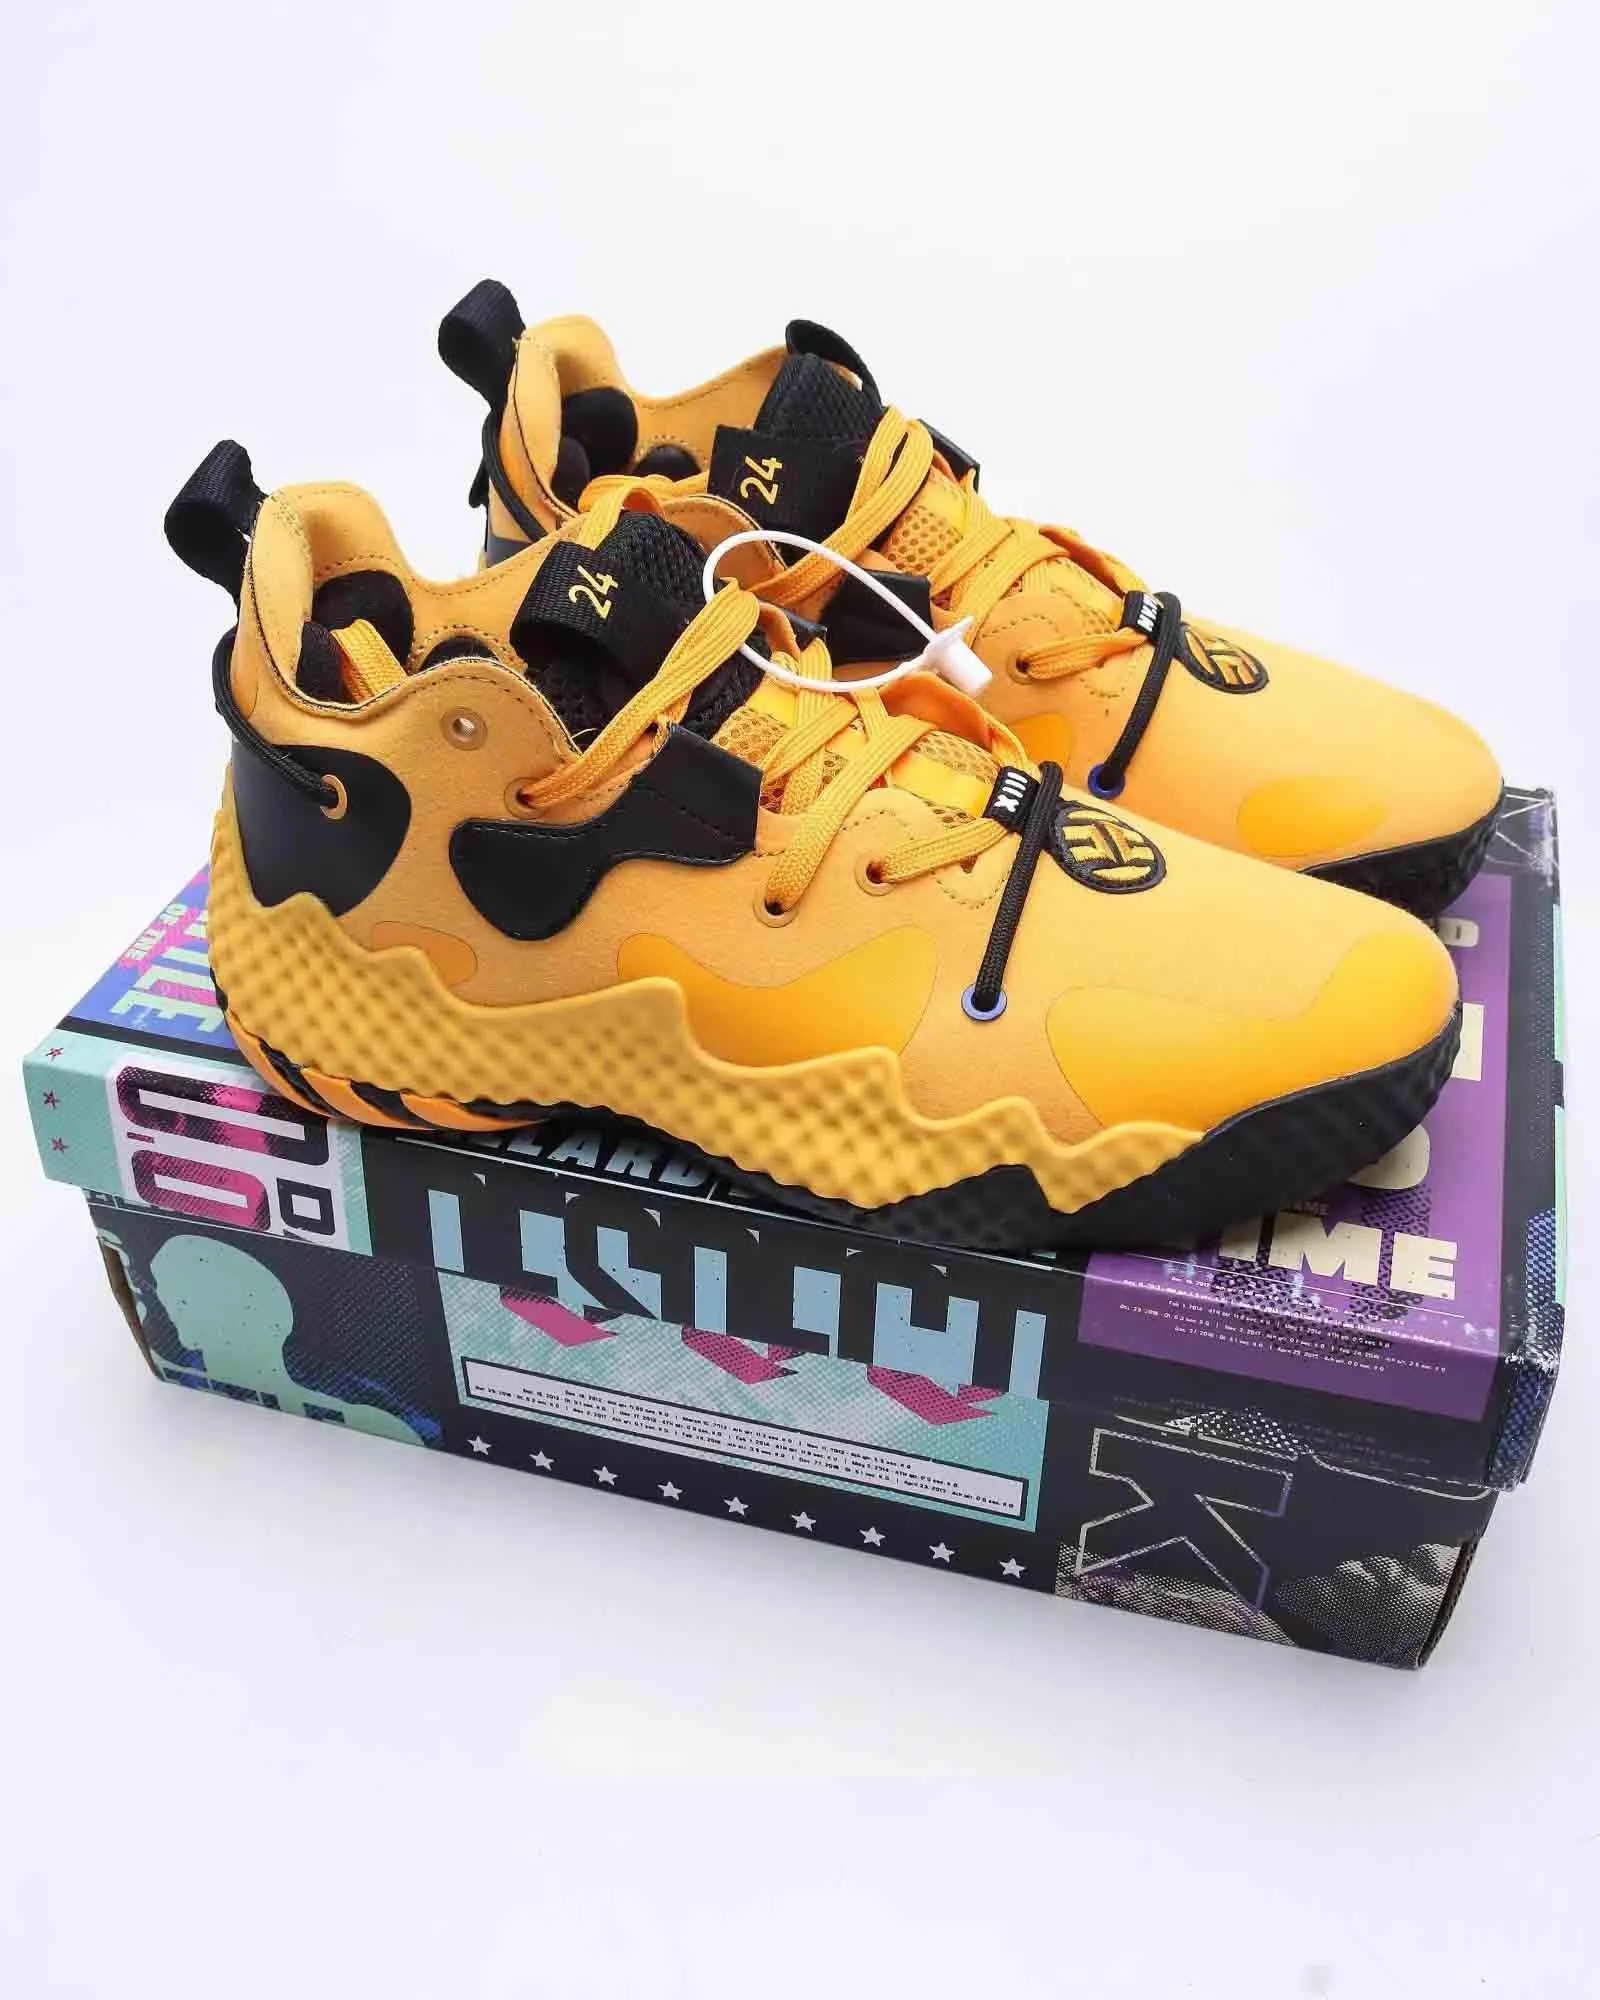 Shamrock 6 generation basketball shoes with breathable elastic upper speed rubber outsole for outdoor sports Actual combat yellow